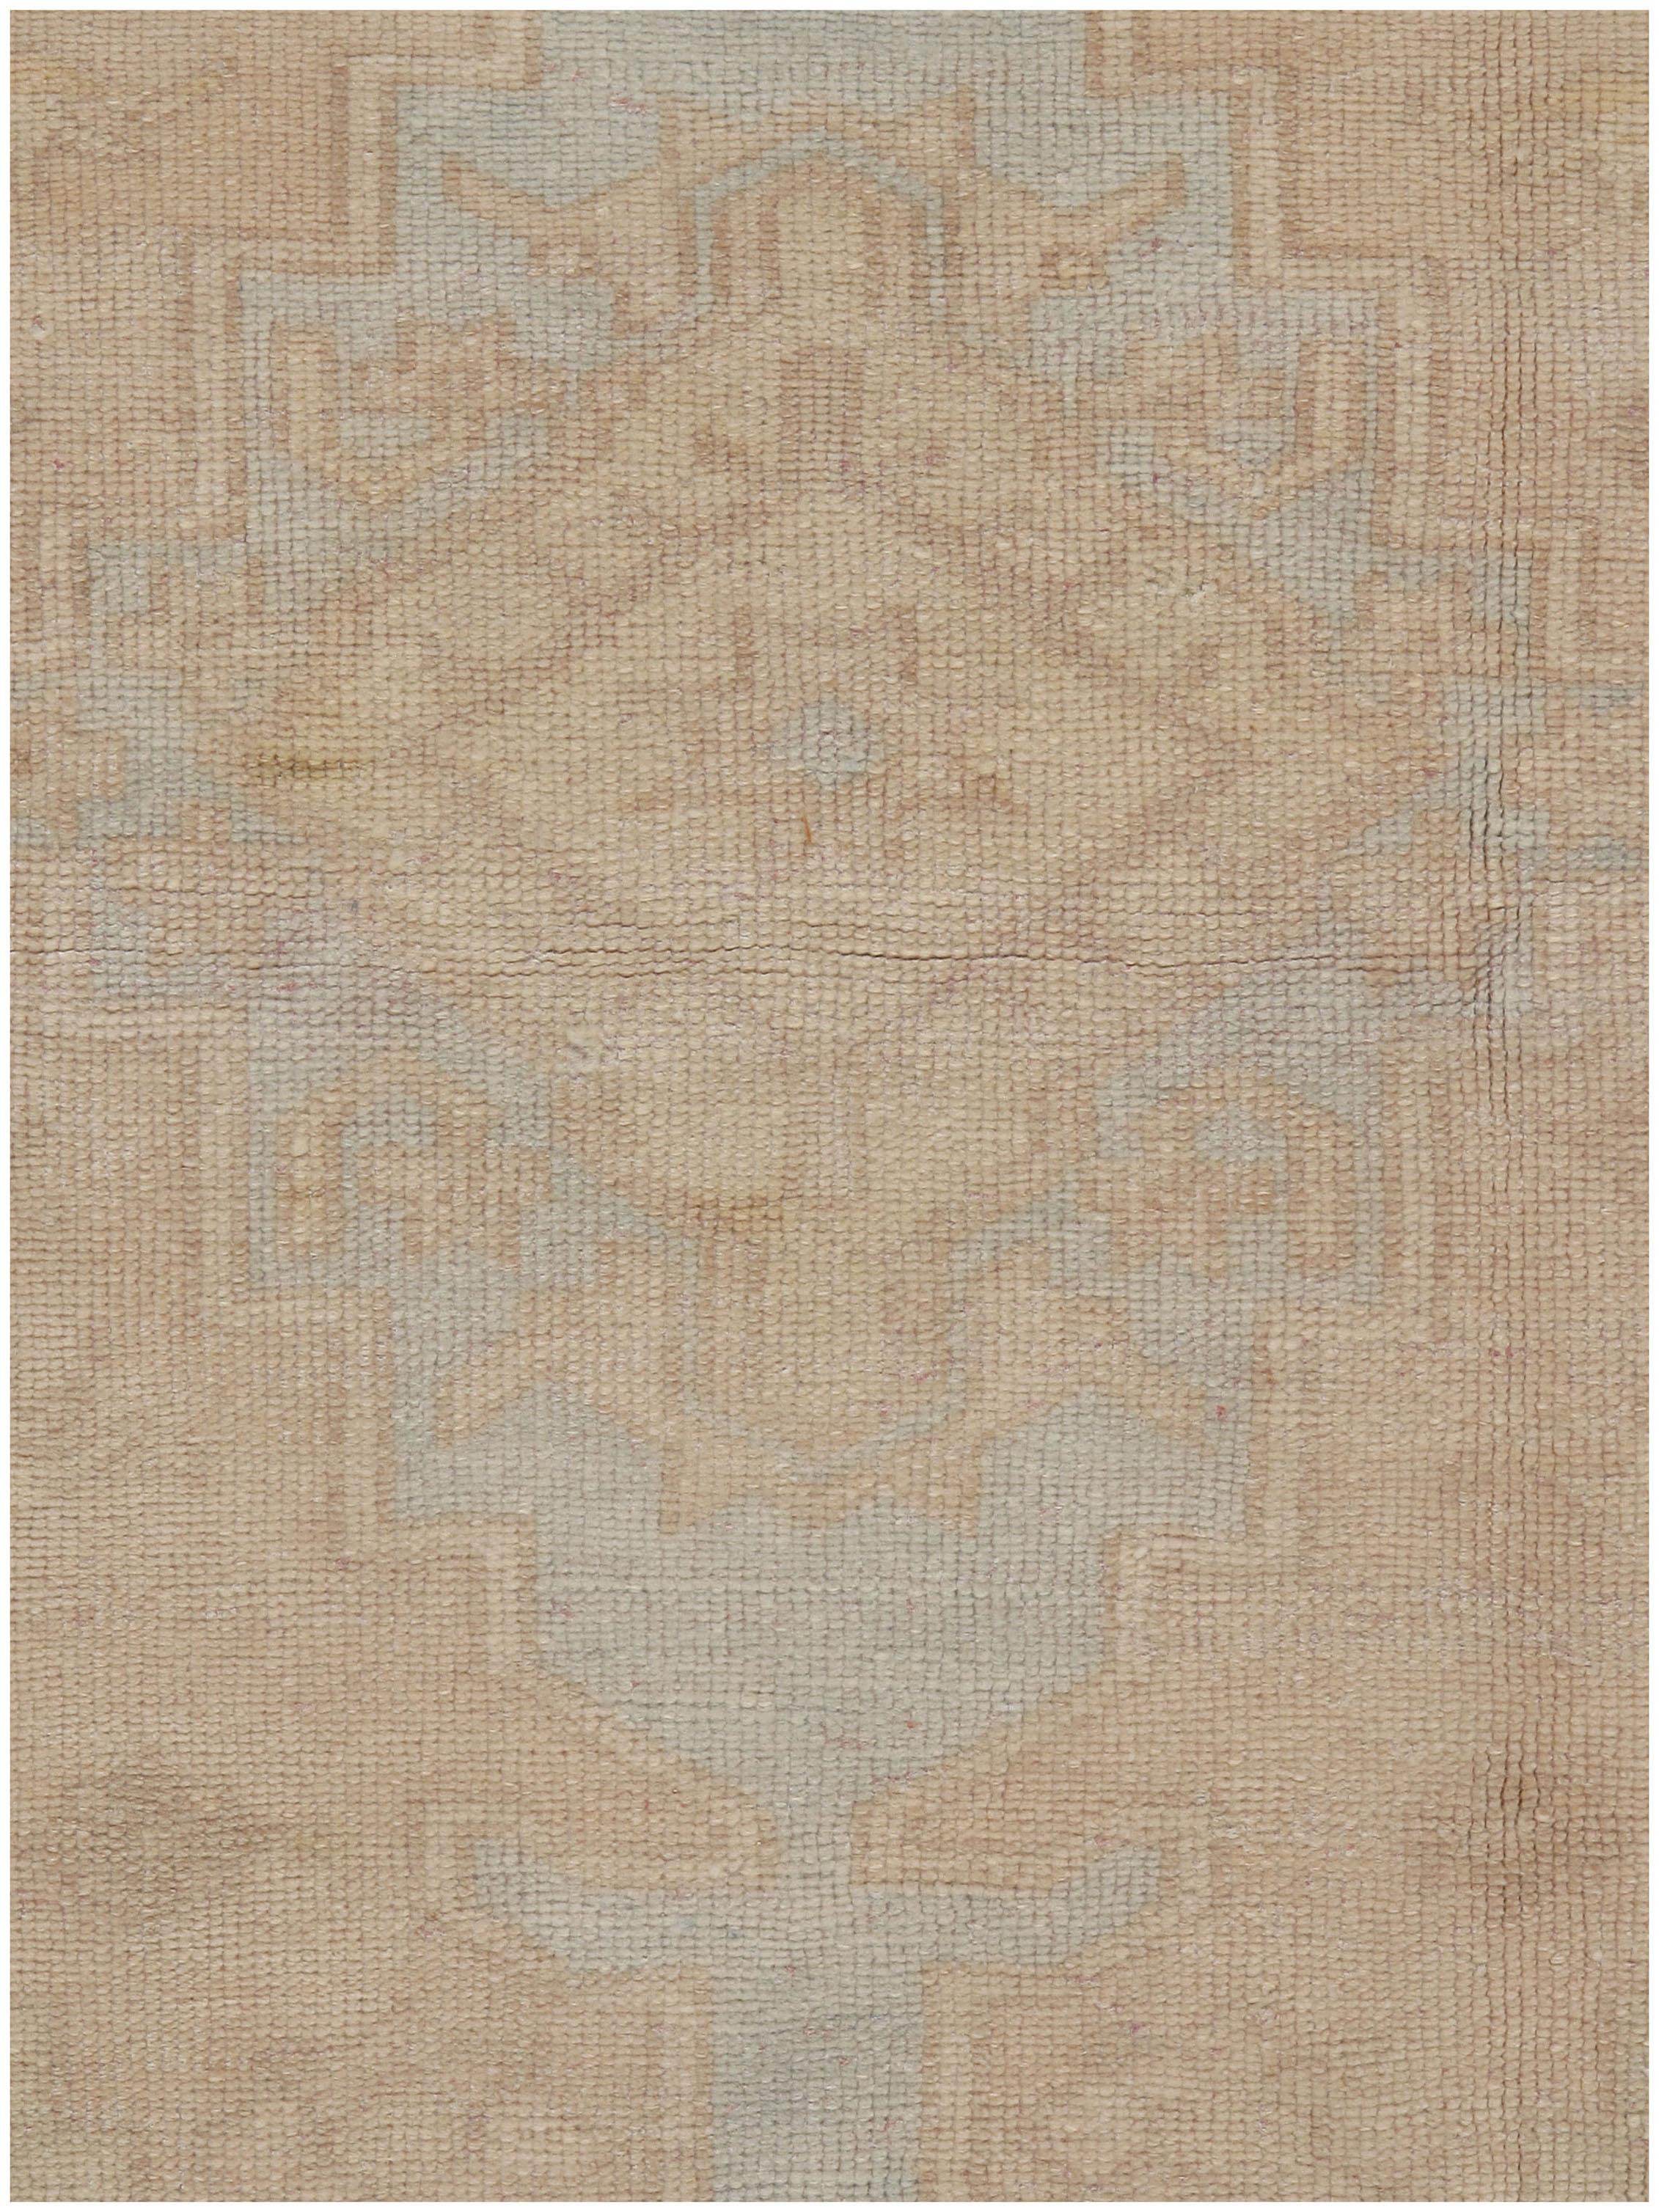 Hand-Woven Vintage Turkish Oushak Area Rug  4'3 x 5'3 For Sale